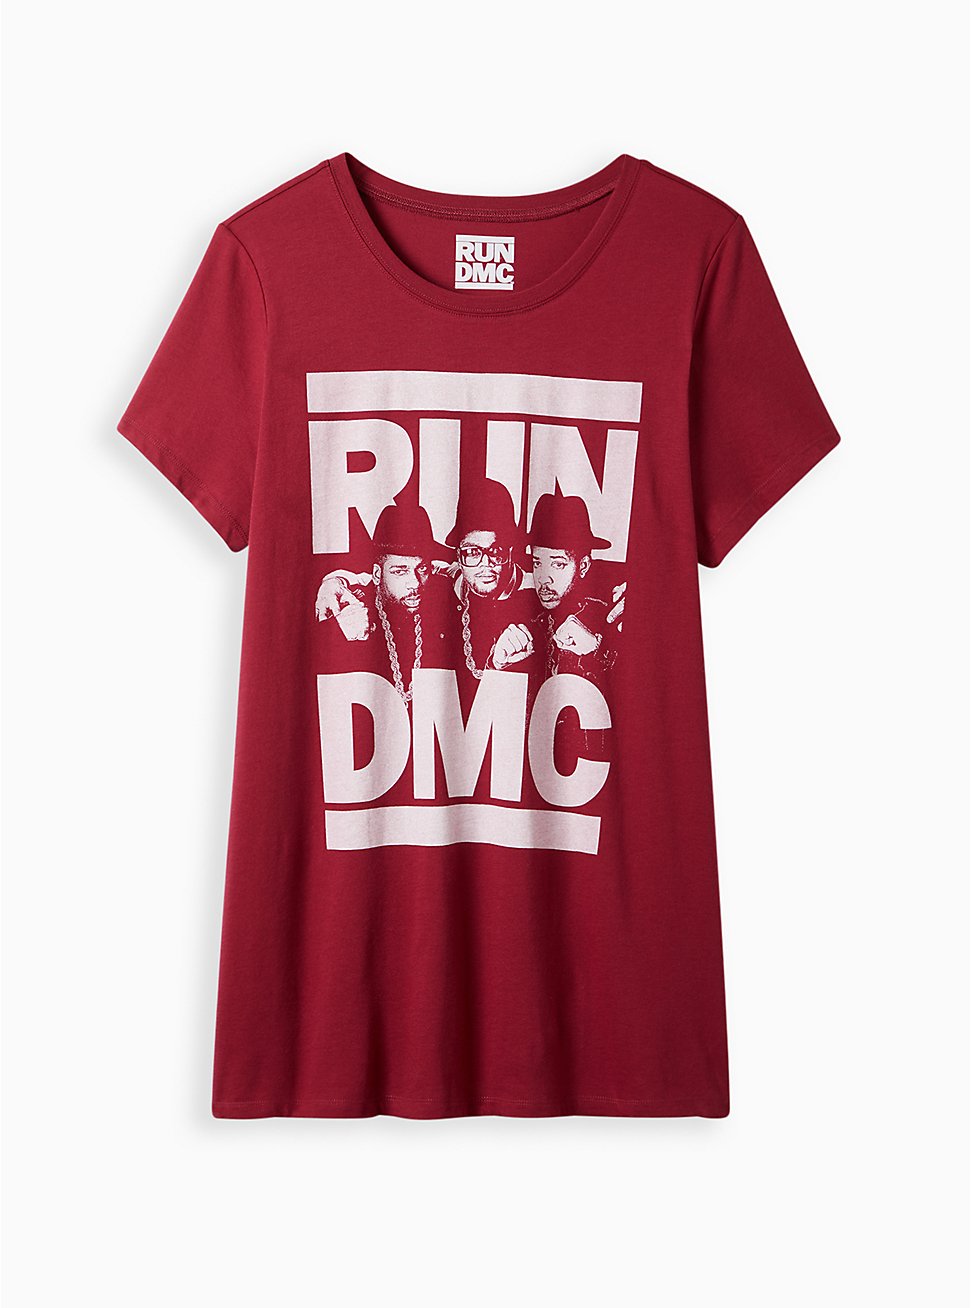 Classic Fit Tunic Tee - Run DMC Red, RED, hi-res